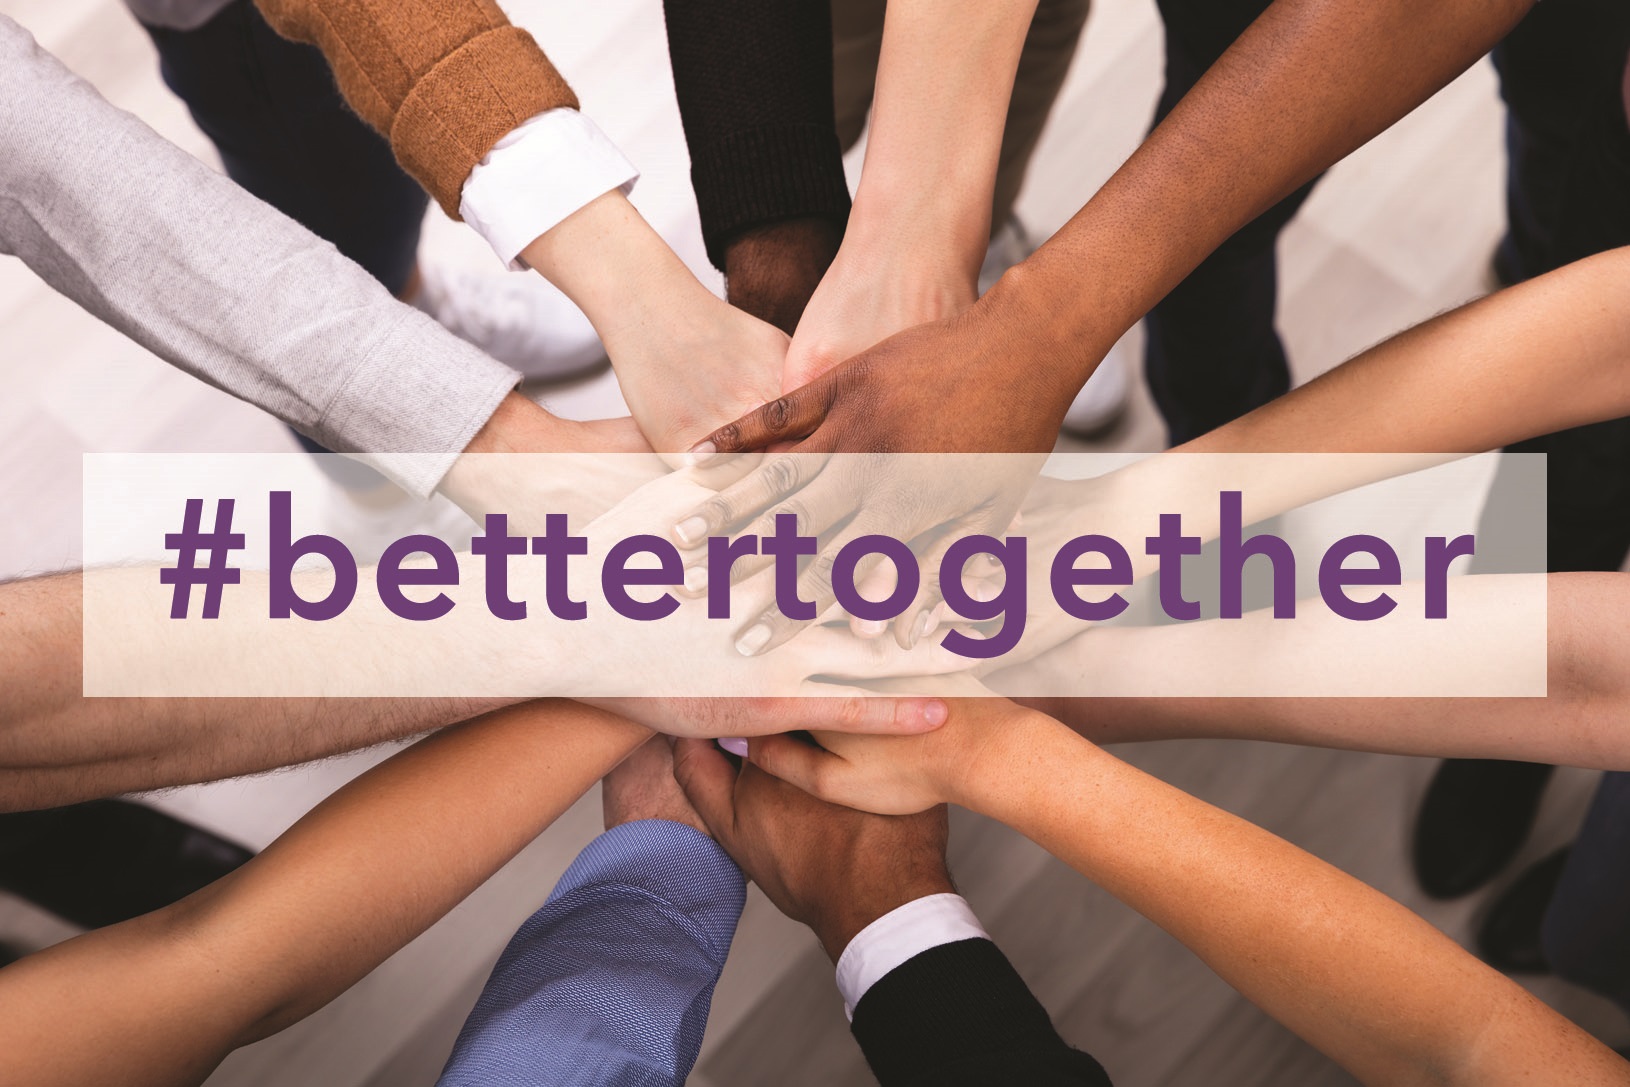 people's hands in a circle with text "#bettertogether"